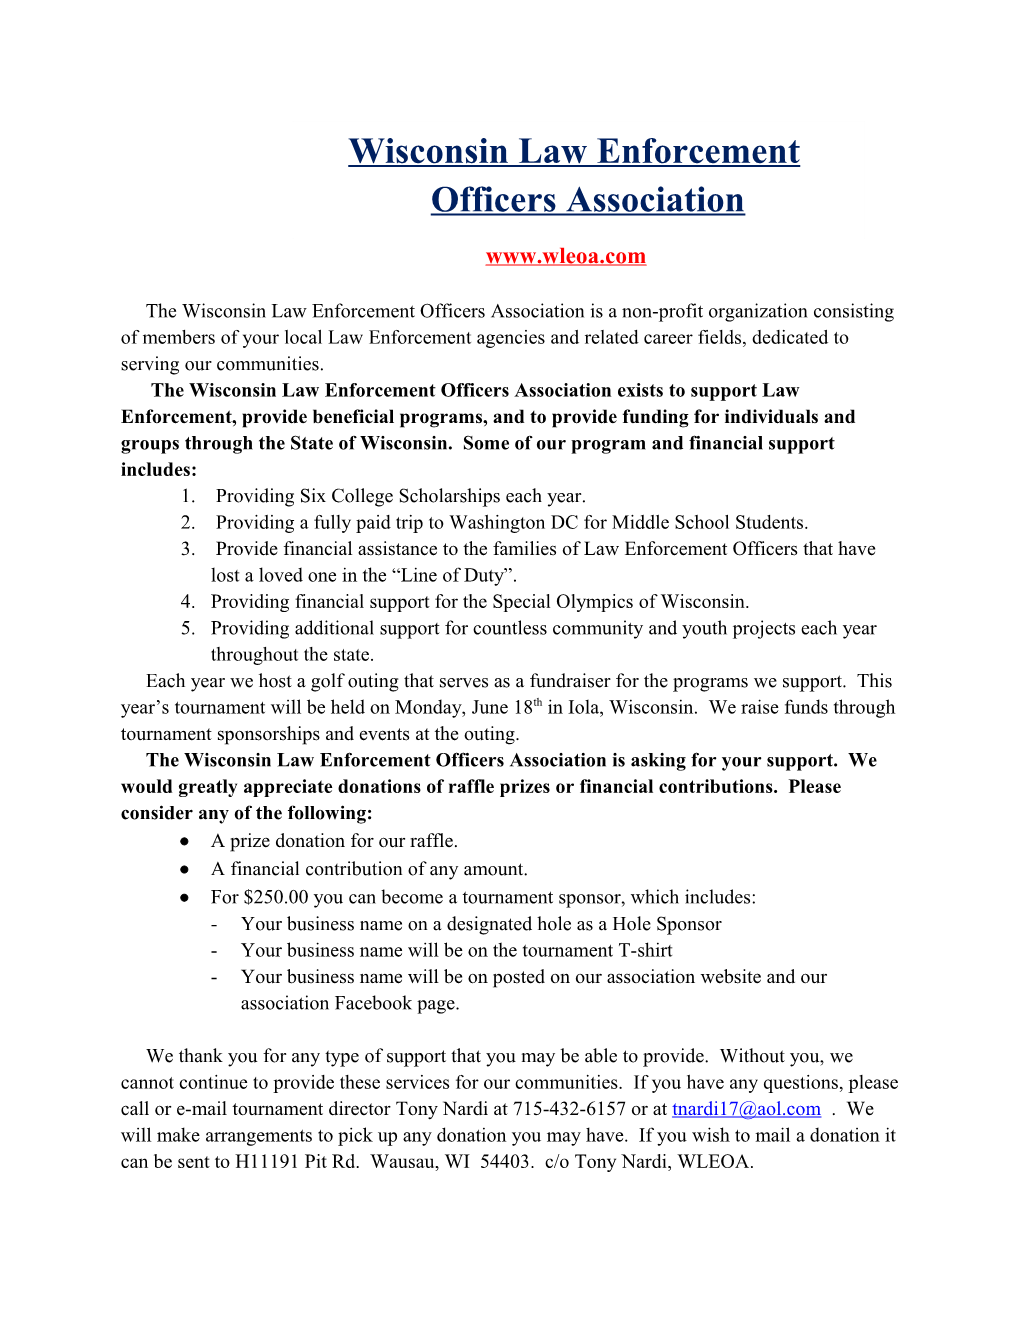 The Wisconsin Law Enforcement Officers Association Is a Non-Profit Organization Consisting